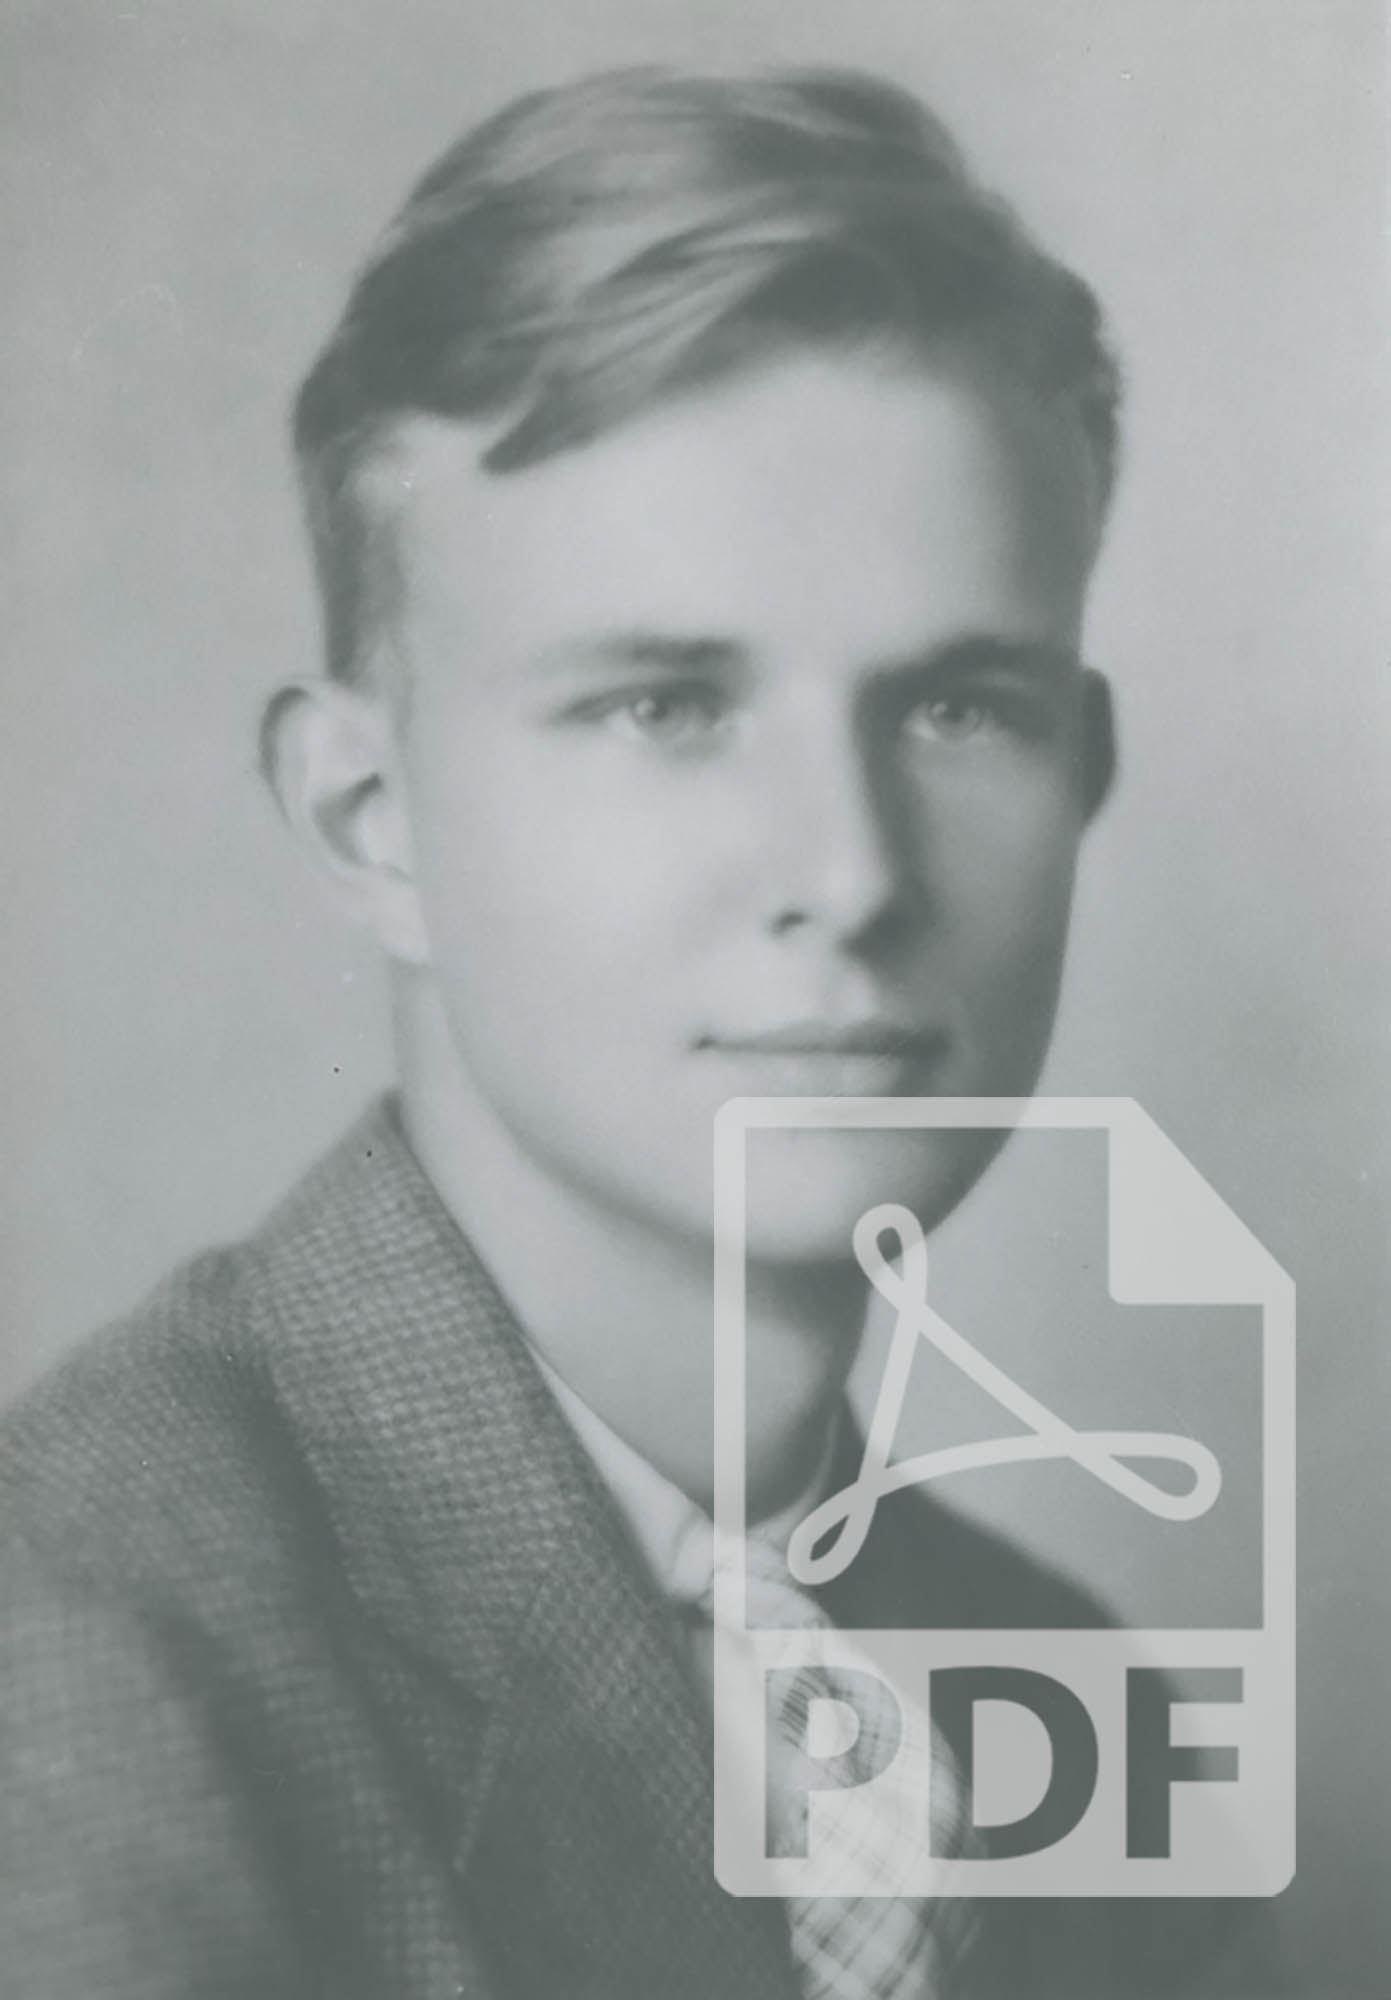 a portrait of Robert Motherwell as a young man with a PDF logo